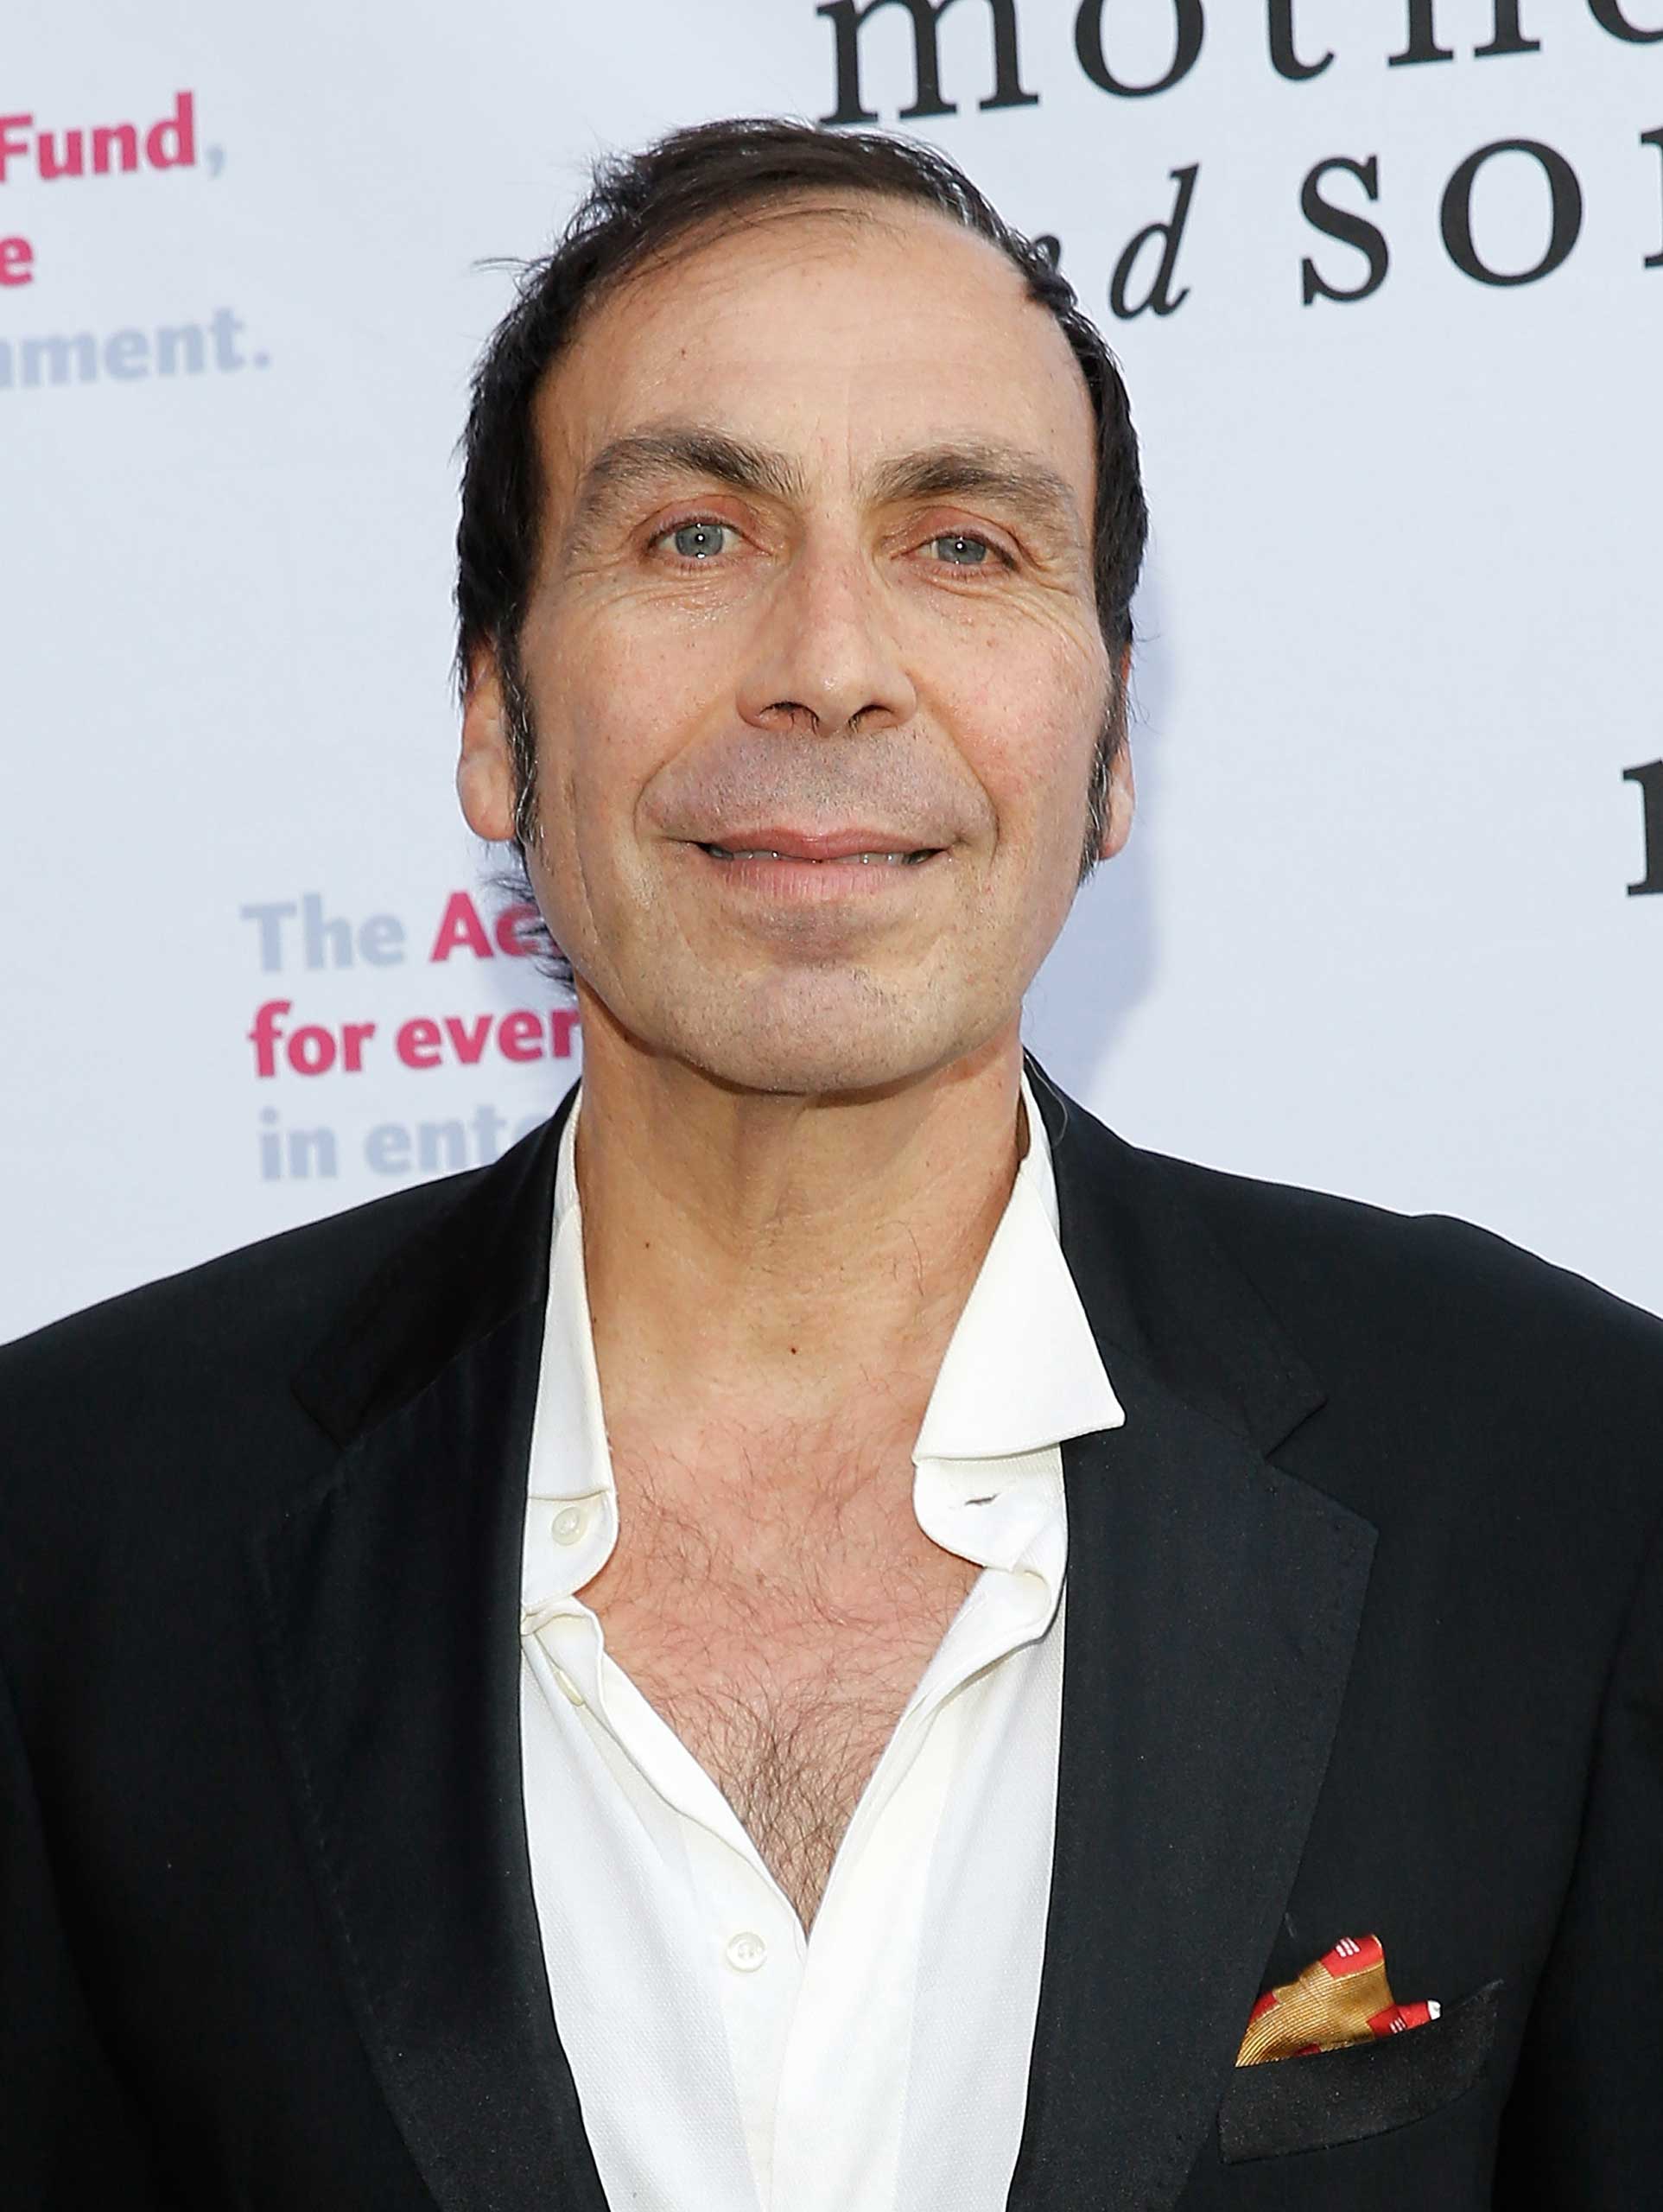 Taylor Negron on May 18, 2014 in New York City. (John Lamparski&mdash;WireImage/Getty Images)